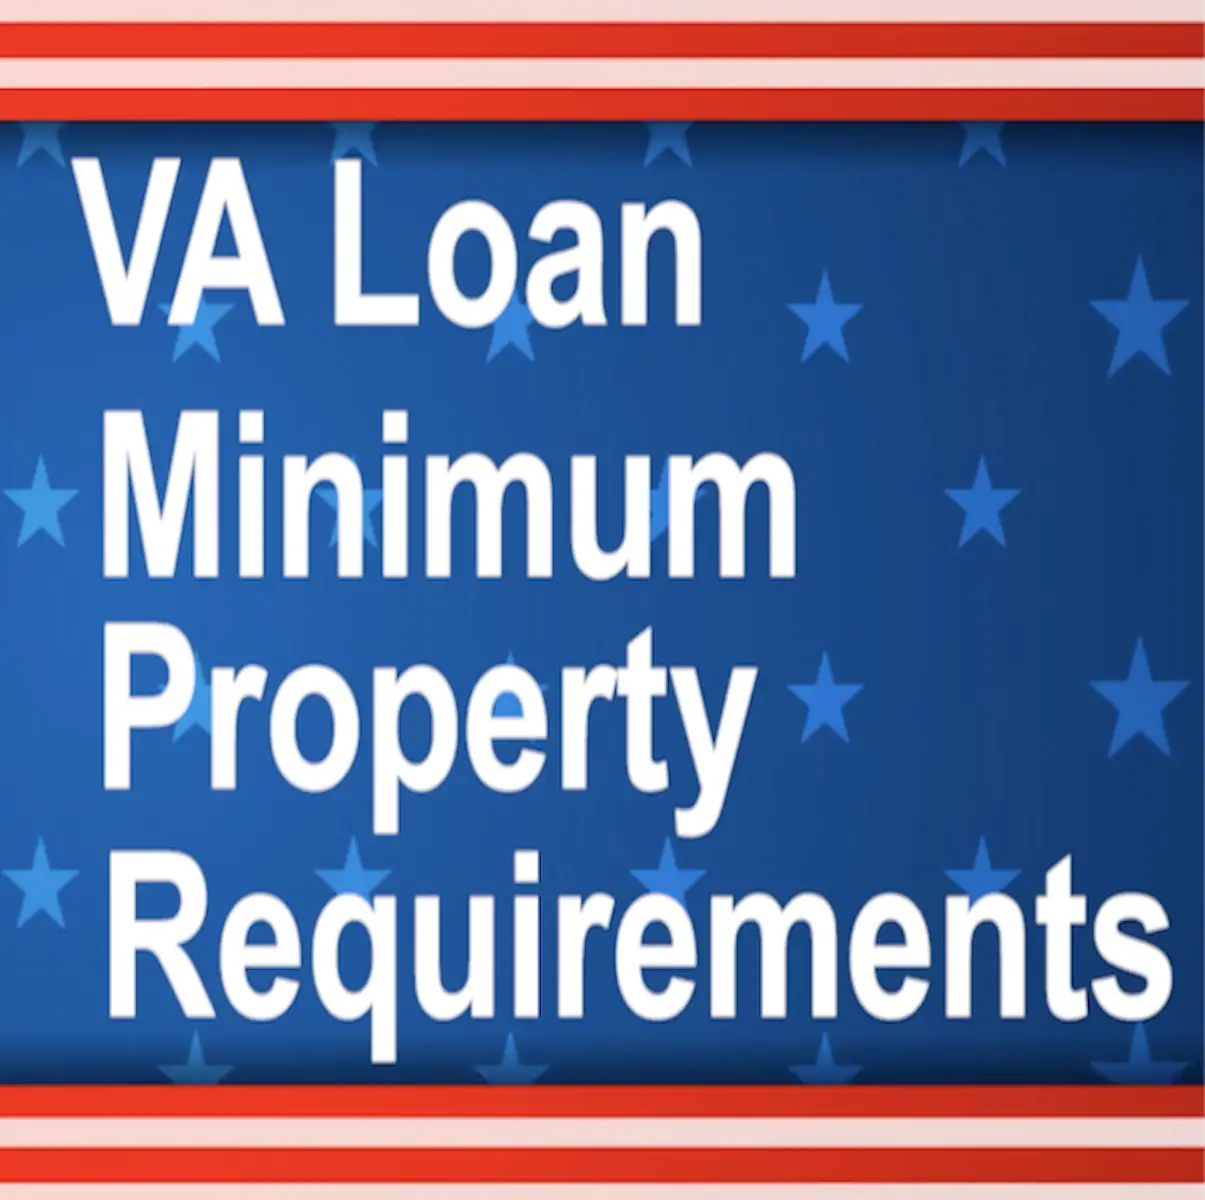 What are VA Loan Minimum Property Requirements?